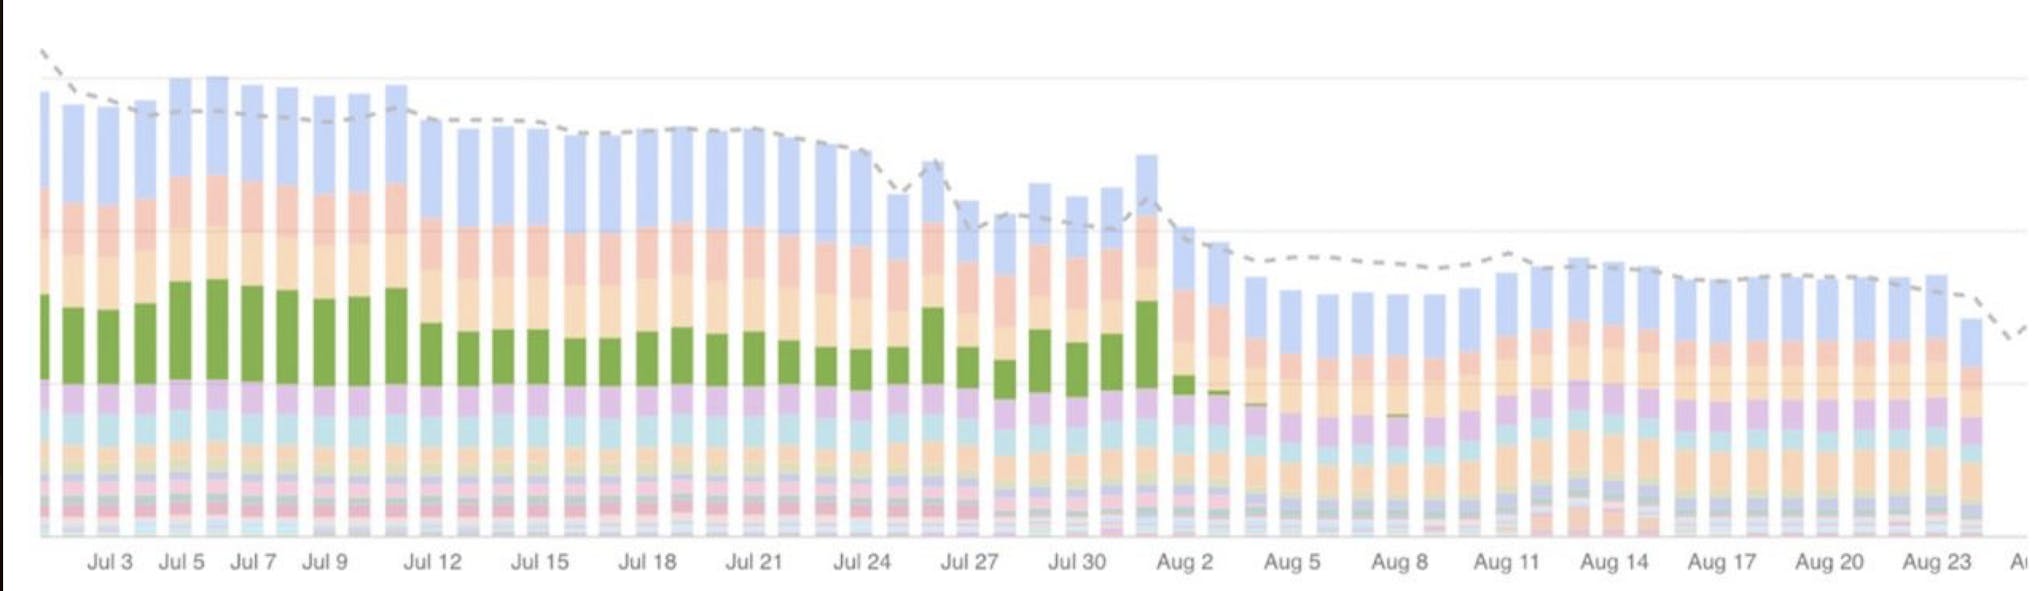 The green bar is the daily cost of traffic sent between regions (sending logs/metrics).